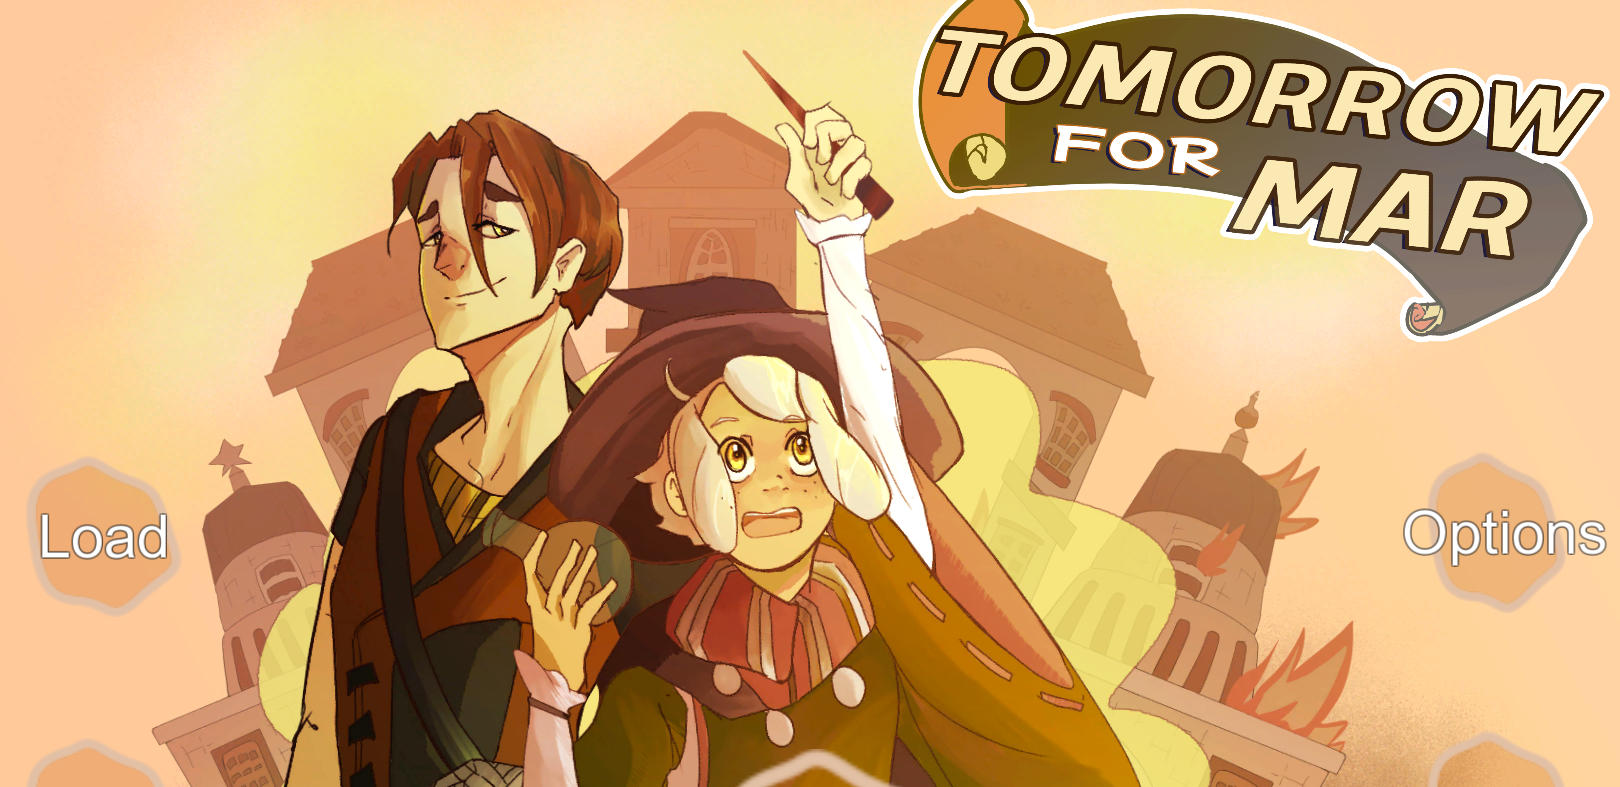 Cover art for Tomorrow For Mar, featuring Mar waving a wand and holding a bottle, and Lamond.